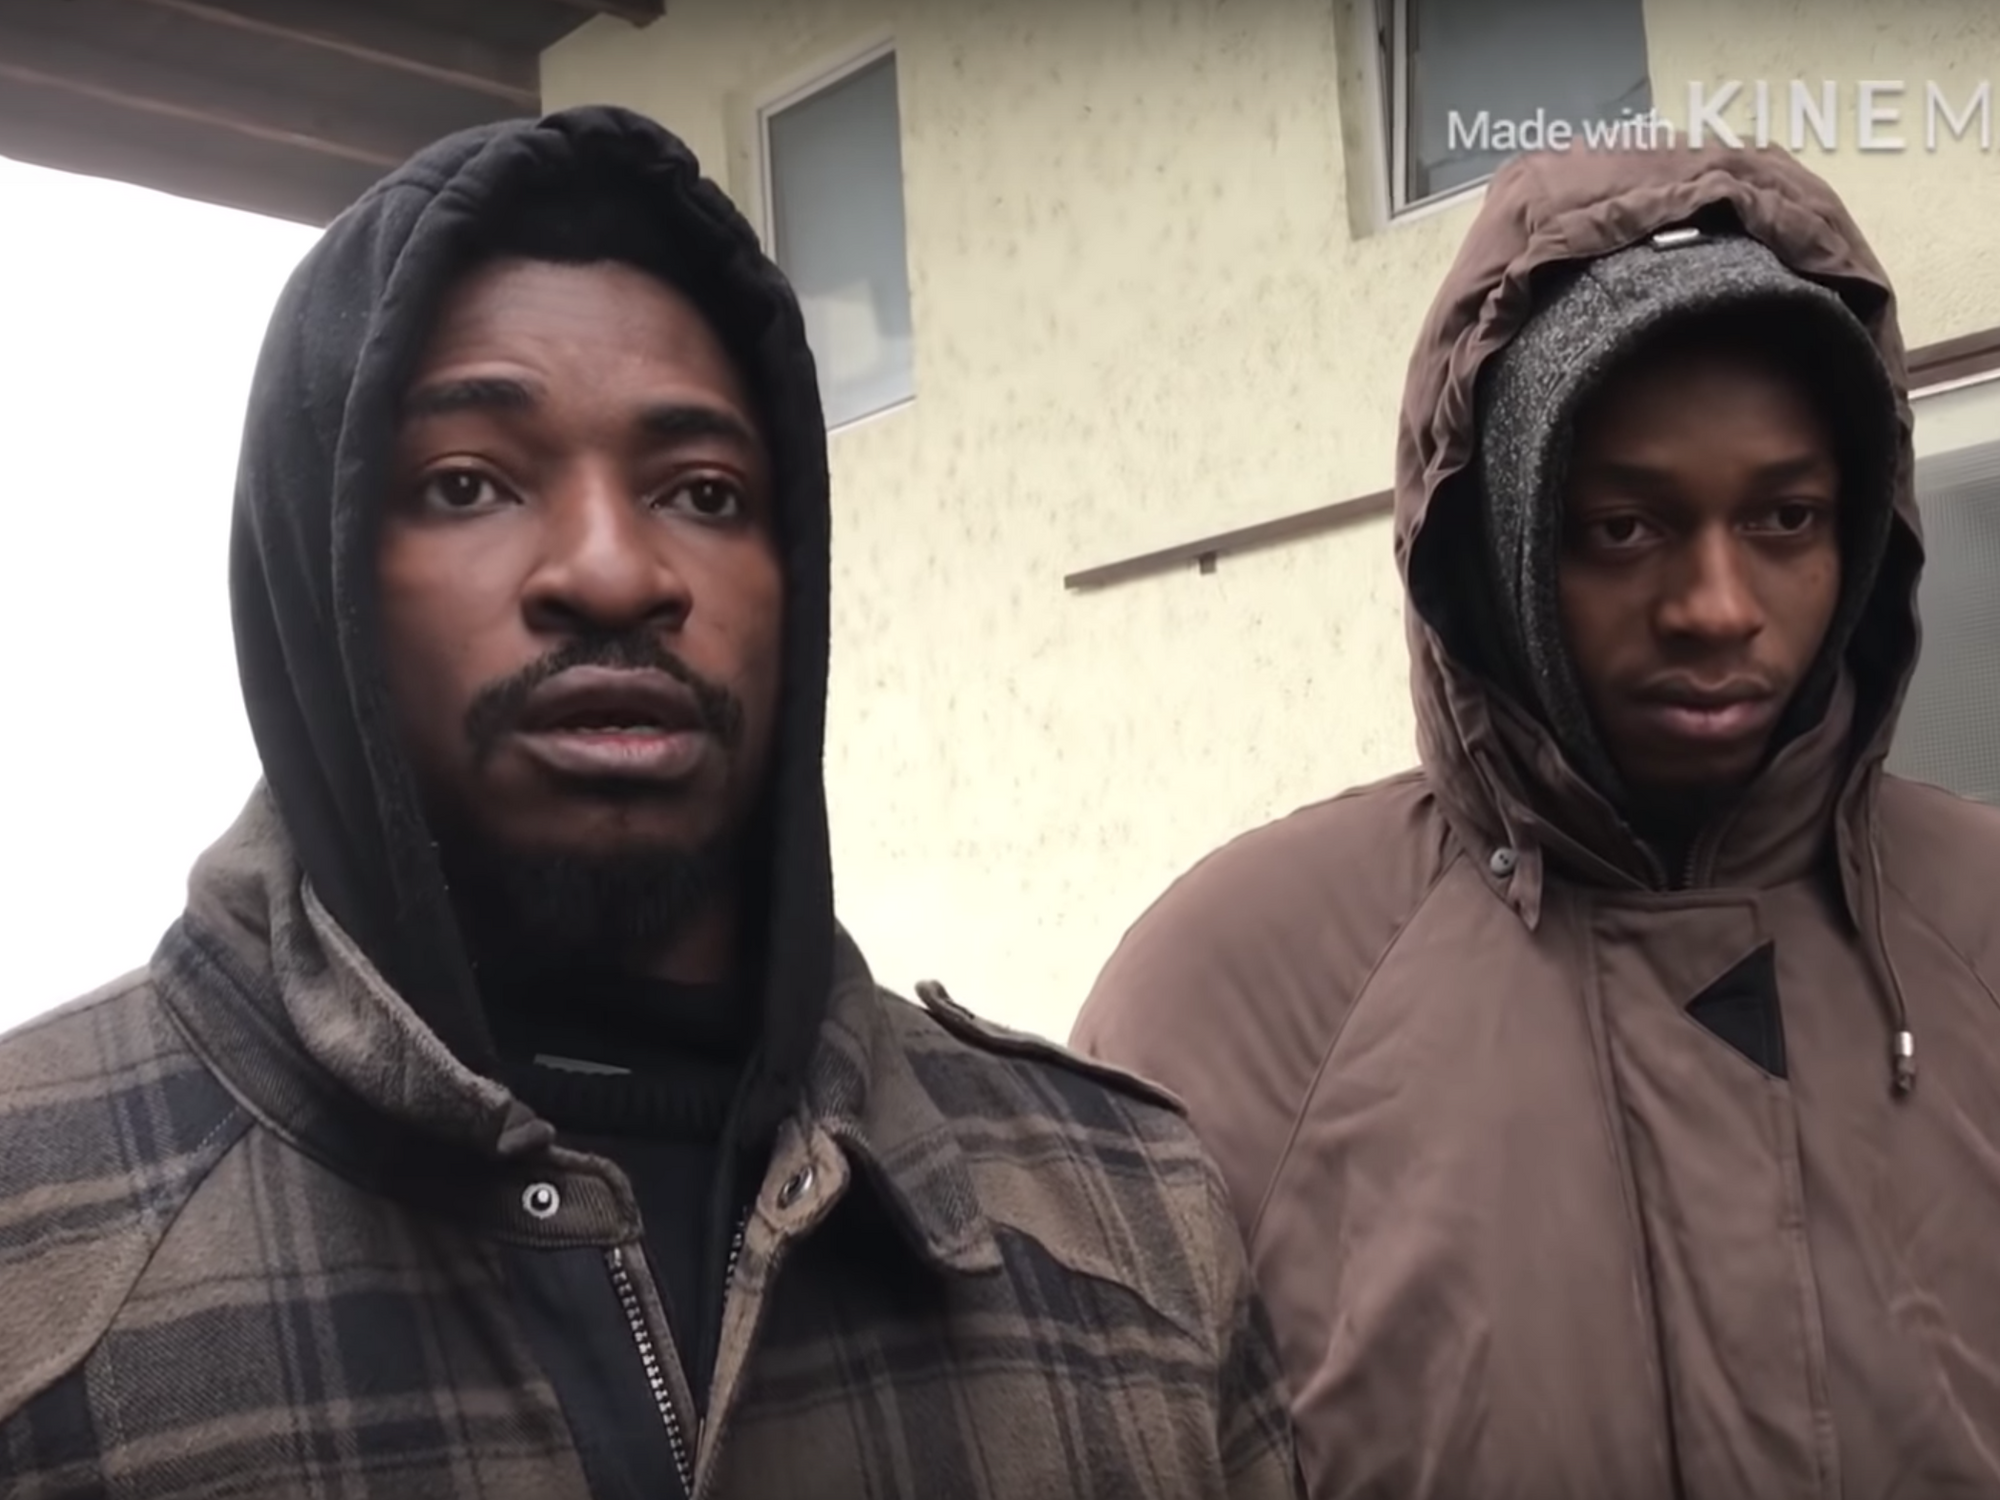 Croatian Authorities are Under Fire for Wrongly Deporting Two Nigerian Students to Bosnia